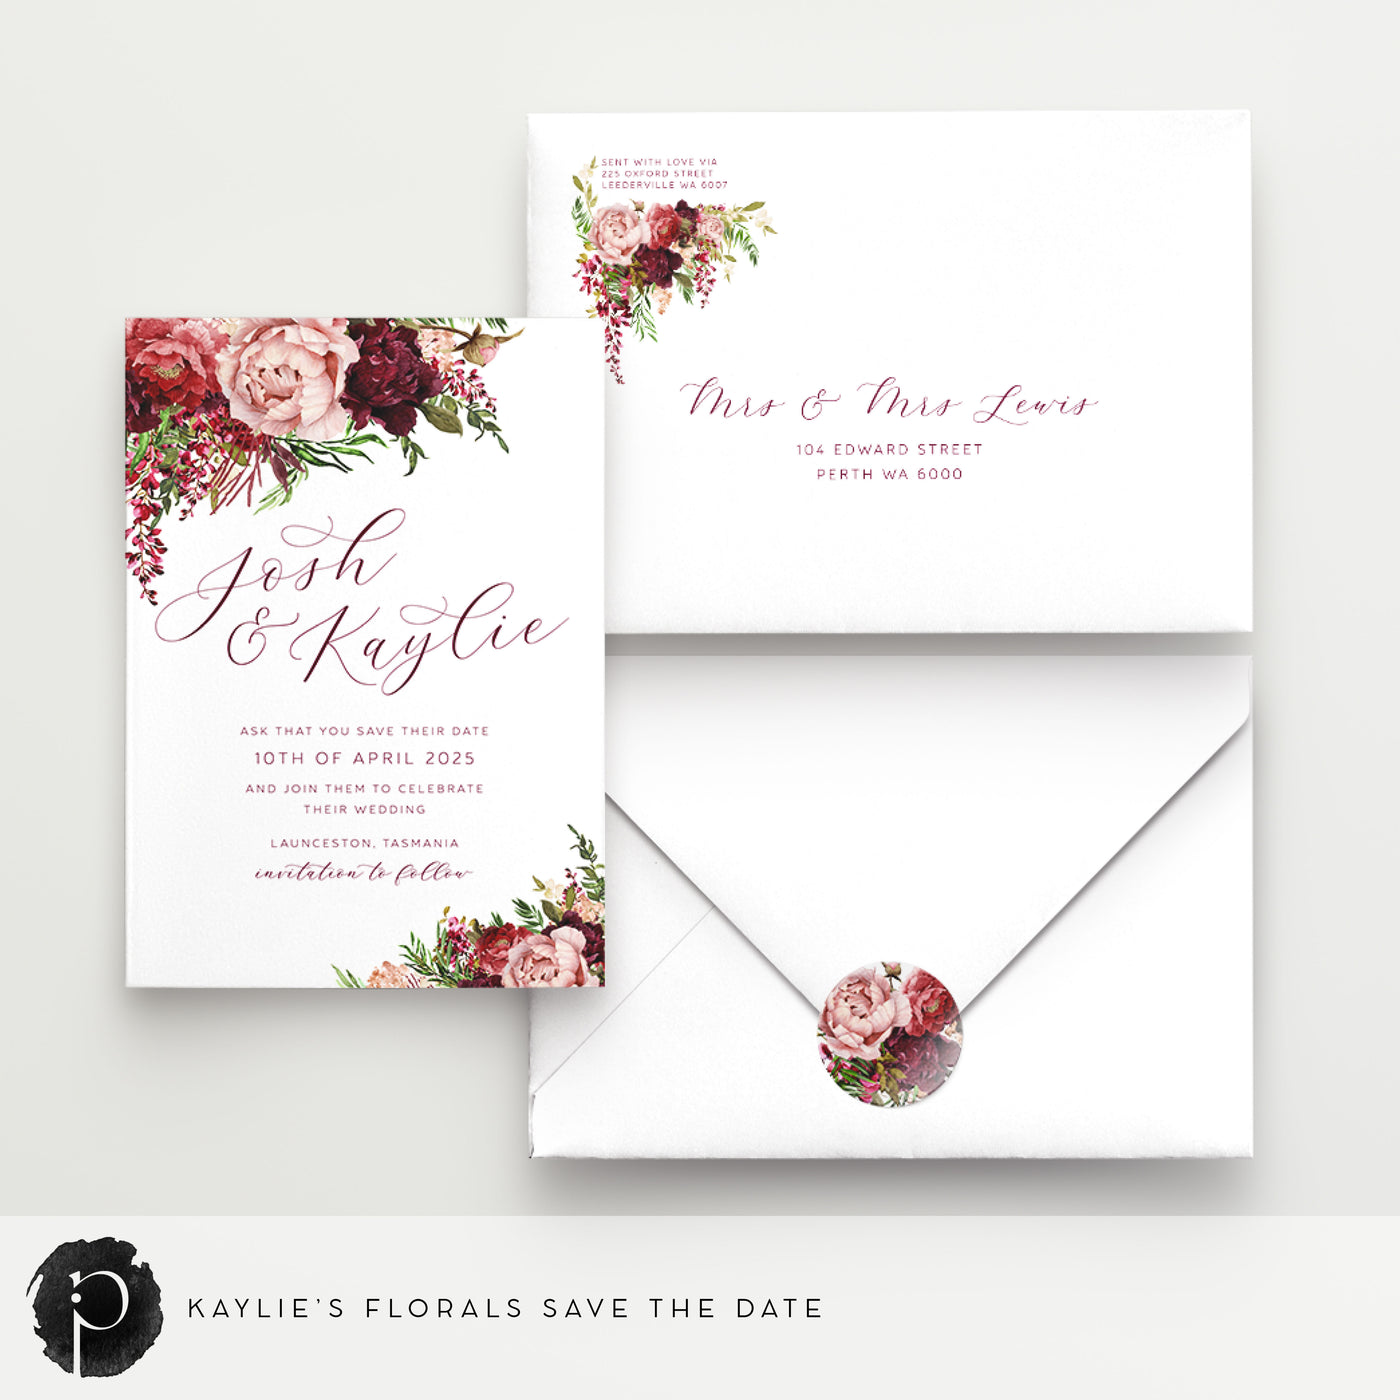 Kaylie's Florals - Save The Date Cards